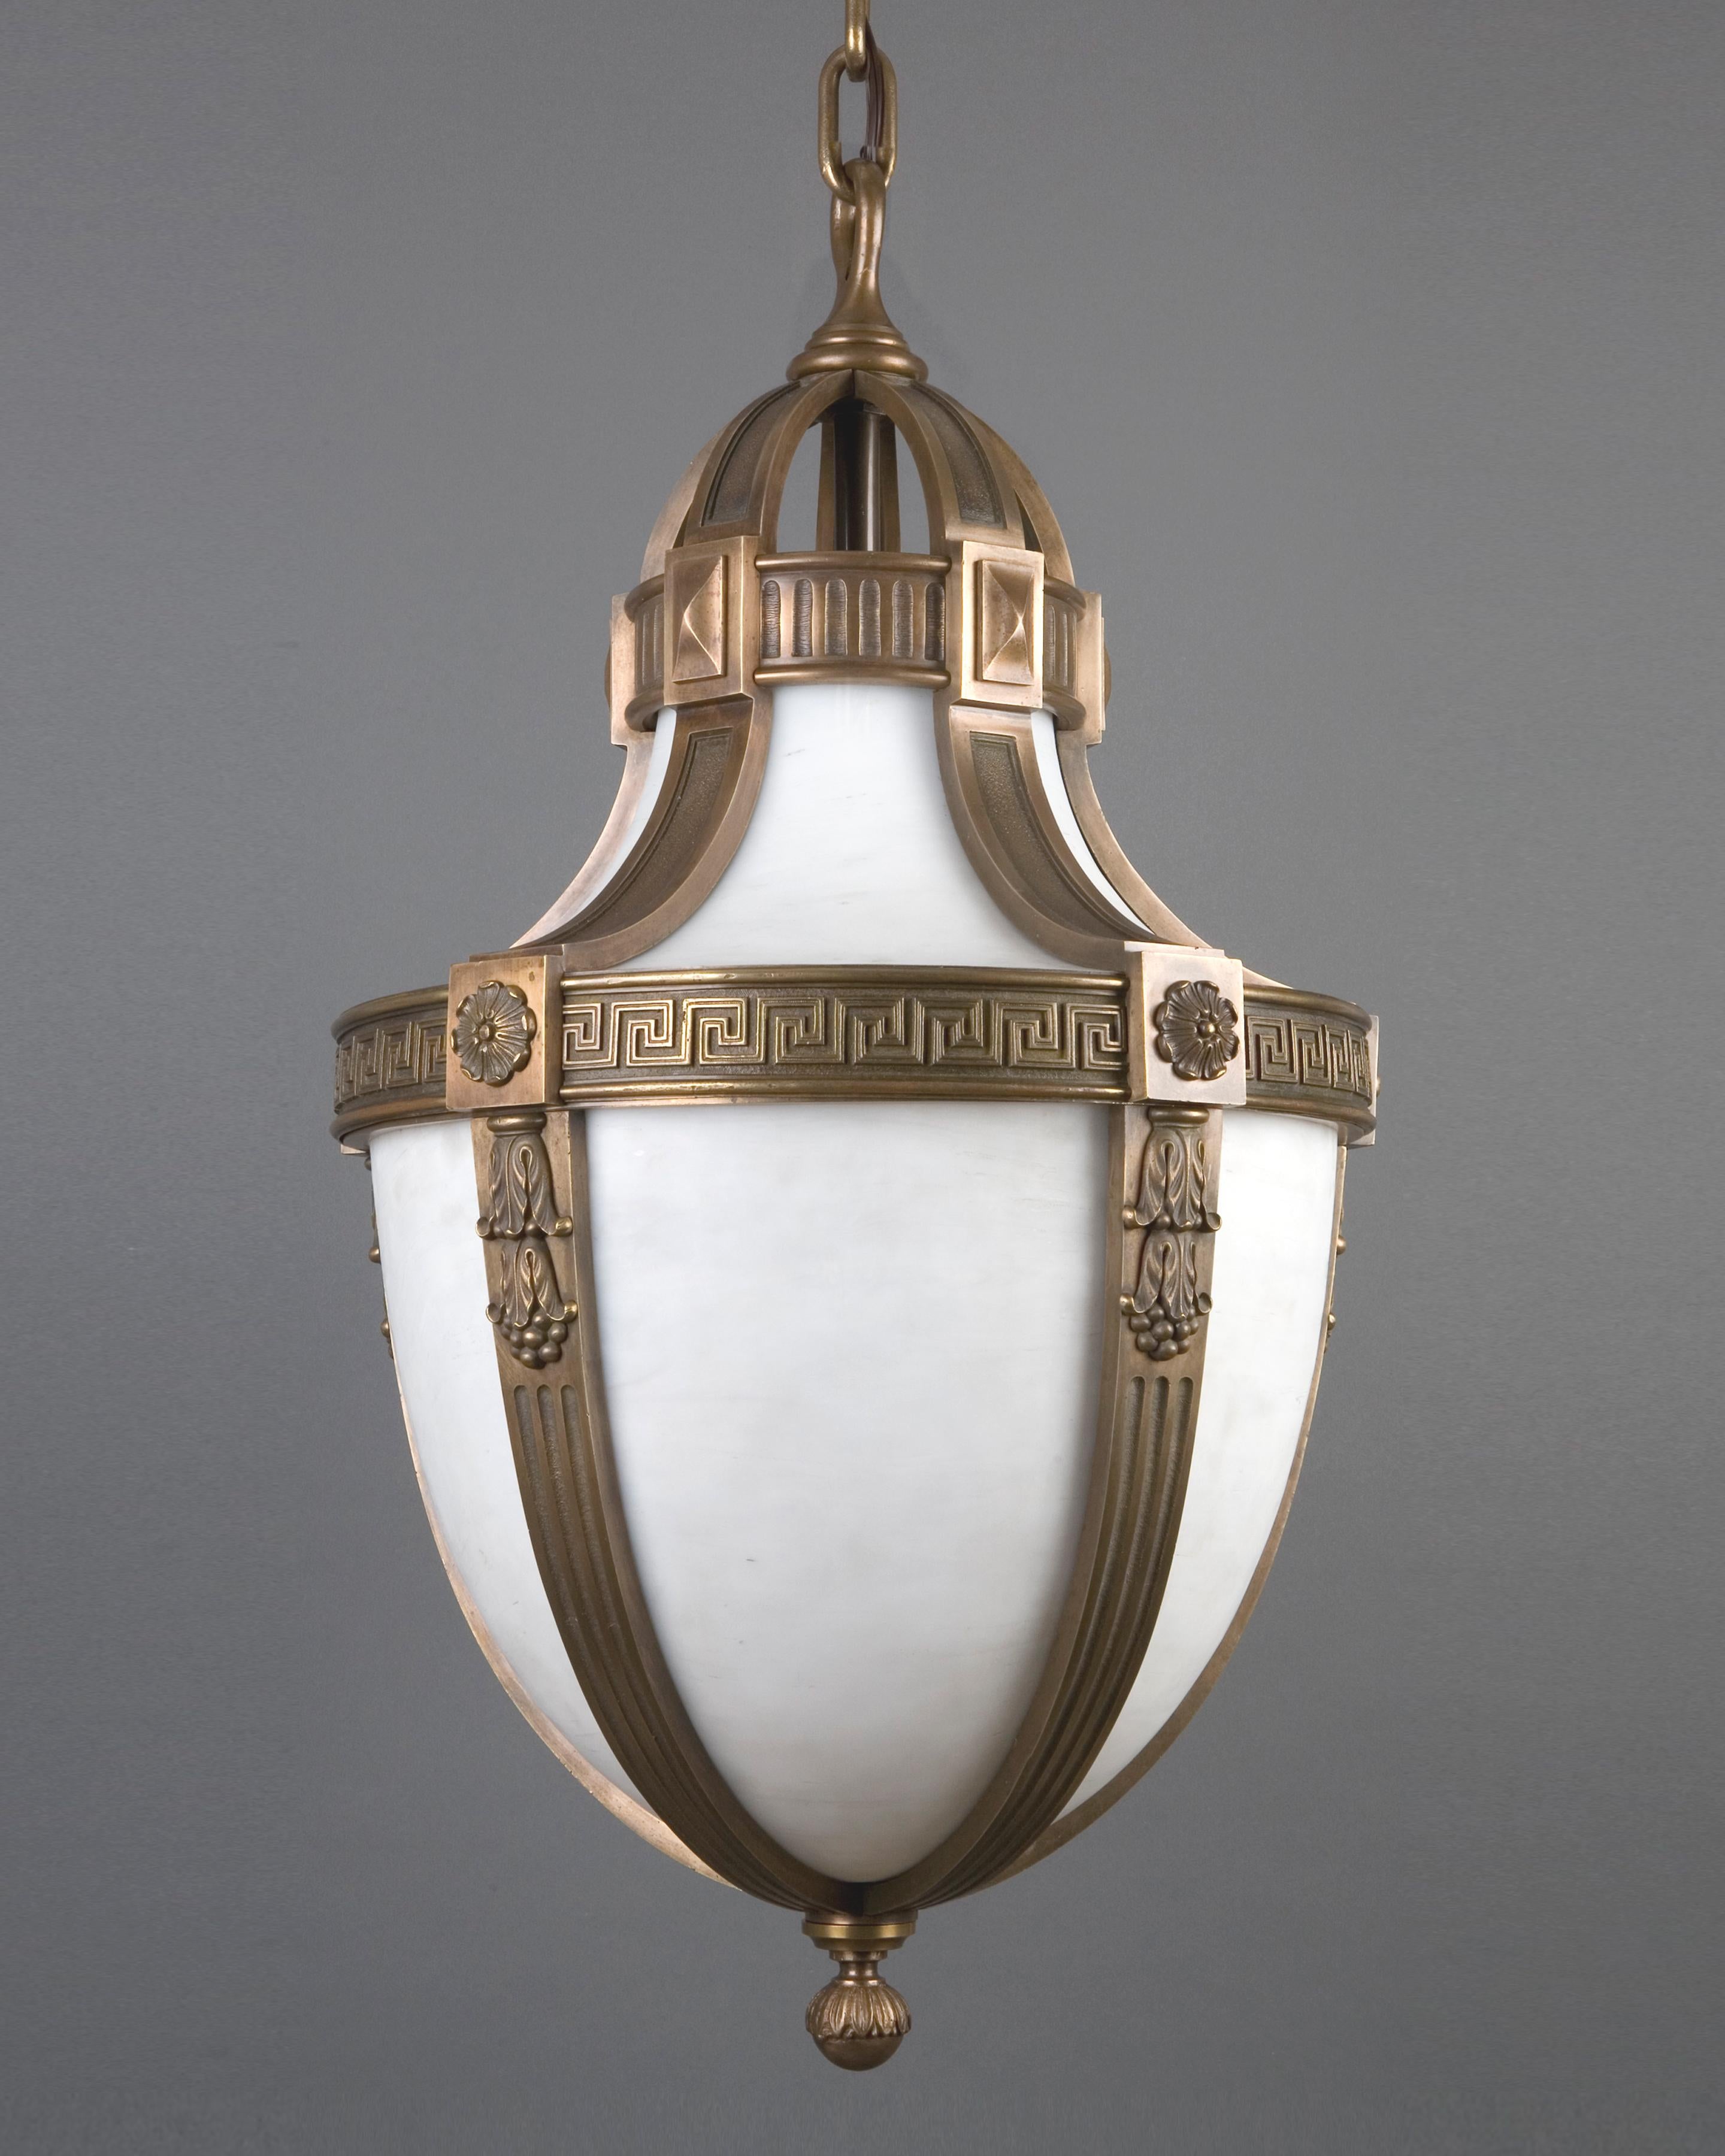 AHL3079

A large Neoclassical pendant lantern having opalescent white art glass panels set in an age-darkened cast bronze frame with a Greek key and bellflower motif. Circa 1900. Due to the antique nature of this fixture, there may be some nicks or